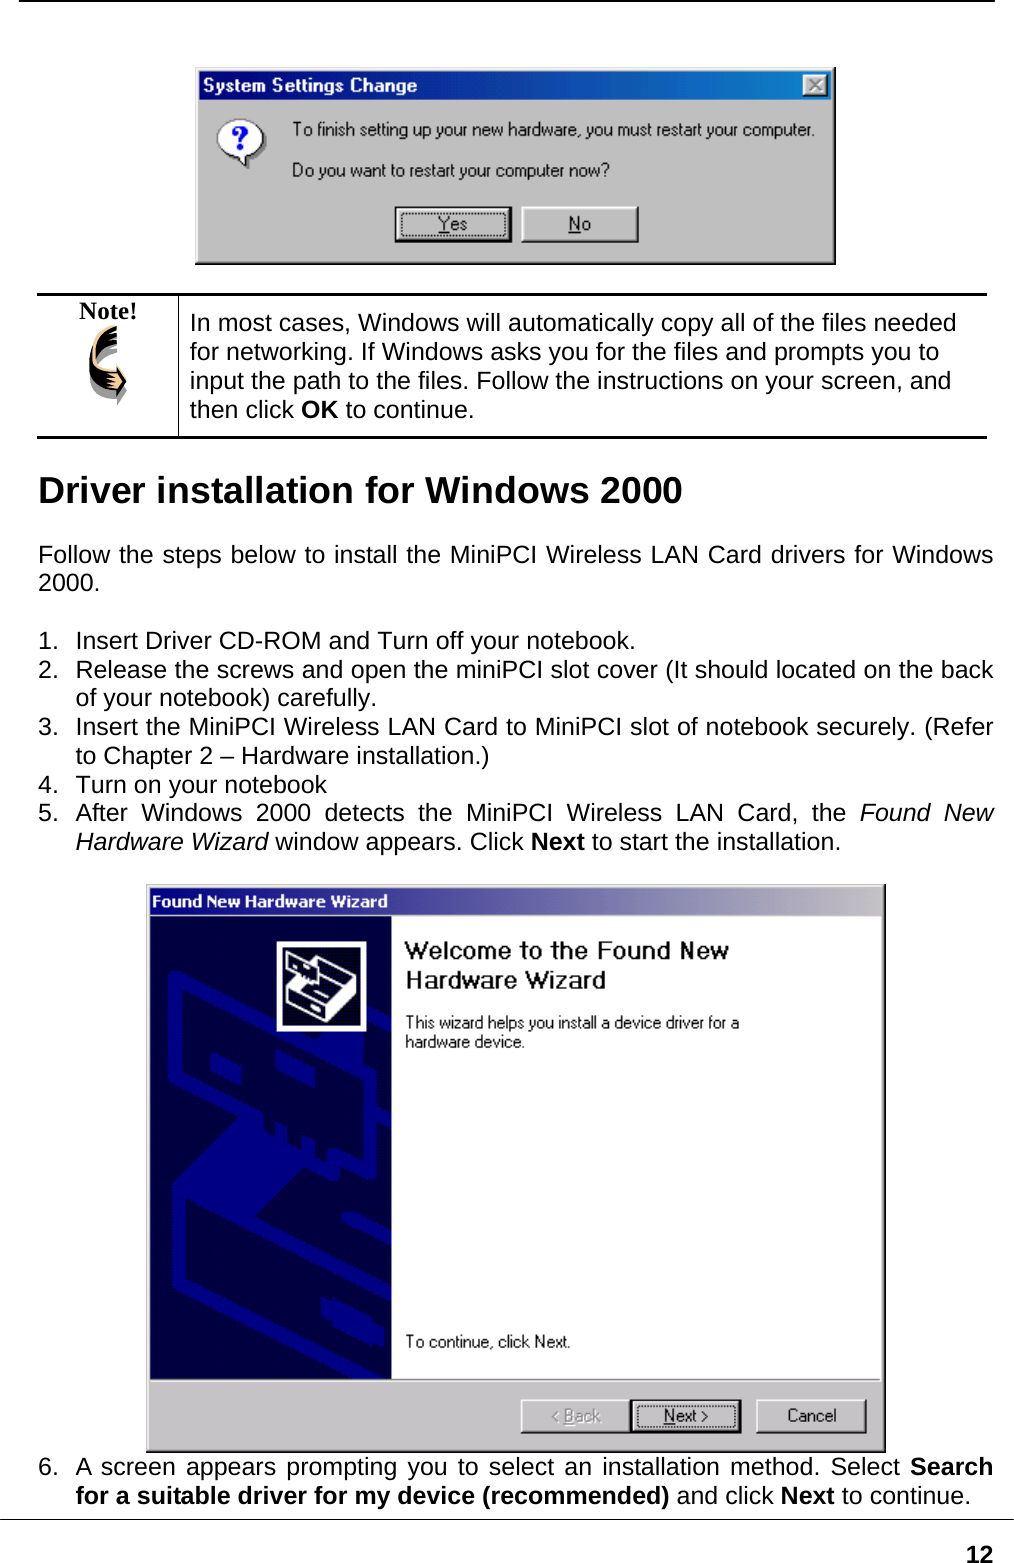   12   Note!  In most cases, Windows will automatically copy all of the files neededfor networking. If Windows asks you for the files and prompts you to input the path to the files. F ollow the instructions on your screen, and then click OK to continue.  river installation for Windows 2000 D Follow the steps below to install the MiniPCI Wireless LAN Card drivers for Windows 000. 2.  n the miniPCI slot cover (It should located on the back 3.  to MiniPCI slot of notebook securely. (Refer  installation.) 5.  Found New Hardware Wizard window appears. Click Next to start the installation.  2 1.  Insert Driver CD-ROM and Turn off your notebook. Release the screws and opeof your notebook) carefully. Insert the MiniPCI Wireless LAN Card to Chapter 2 – Hardware4.  Turn on your notebook After Windows 2000 detects the MiniPCI Wireless LAN Card, the  A screen appears prompting you to select an installation method. Select Search6.   for a suitable driver for my device (recommended) and click Next to continue.  